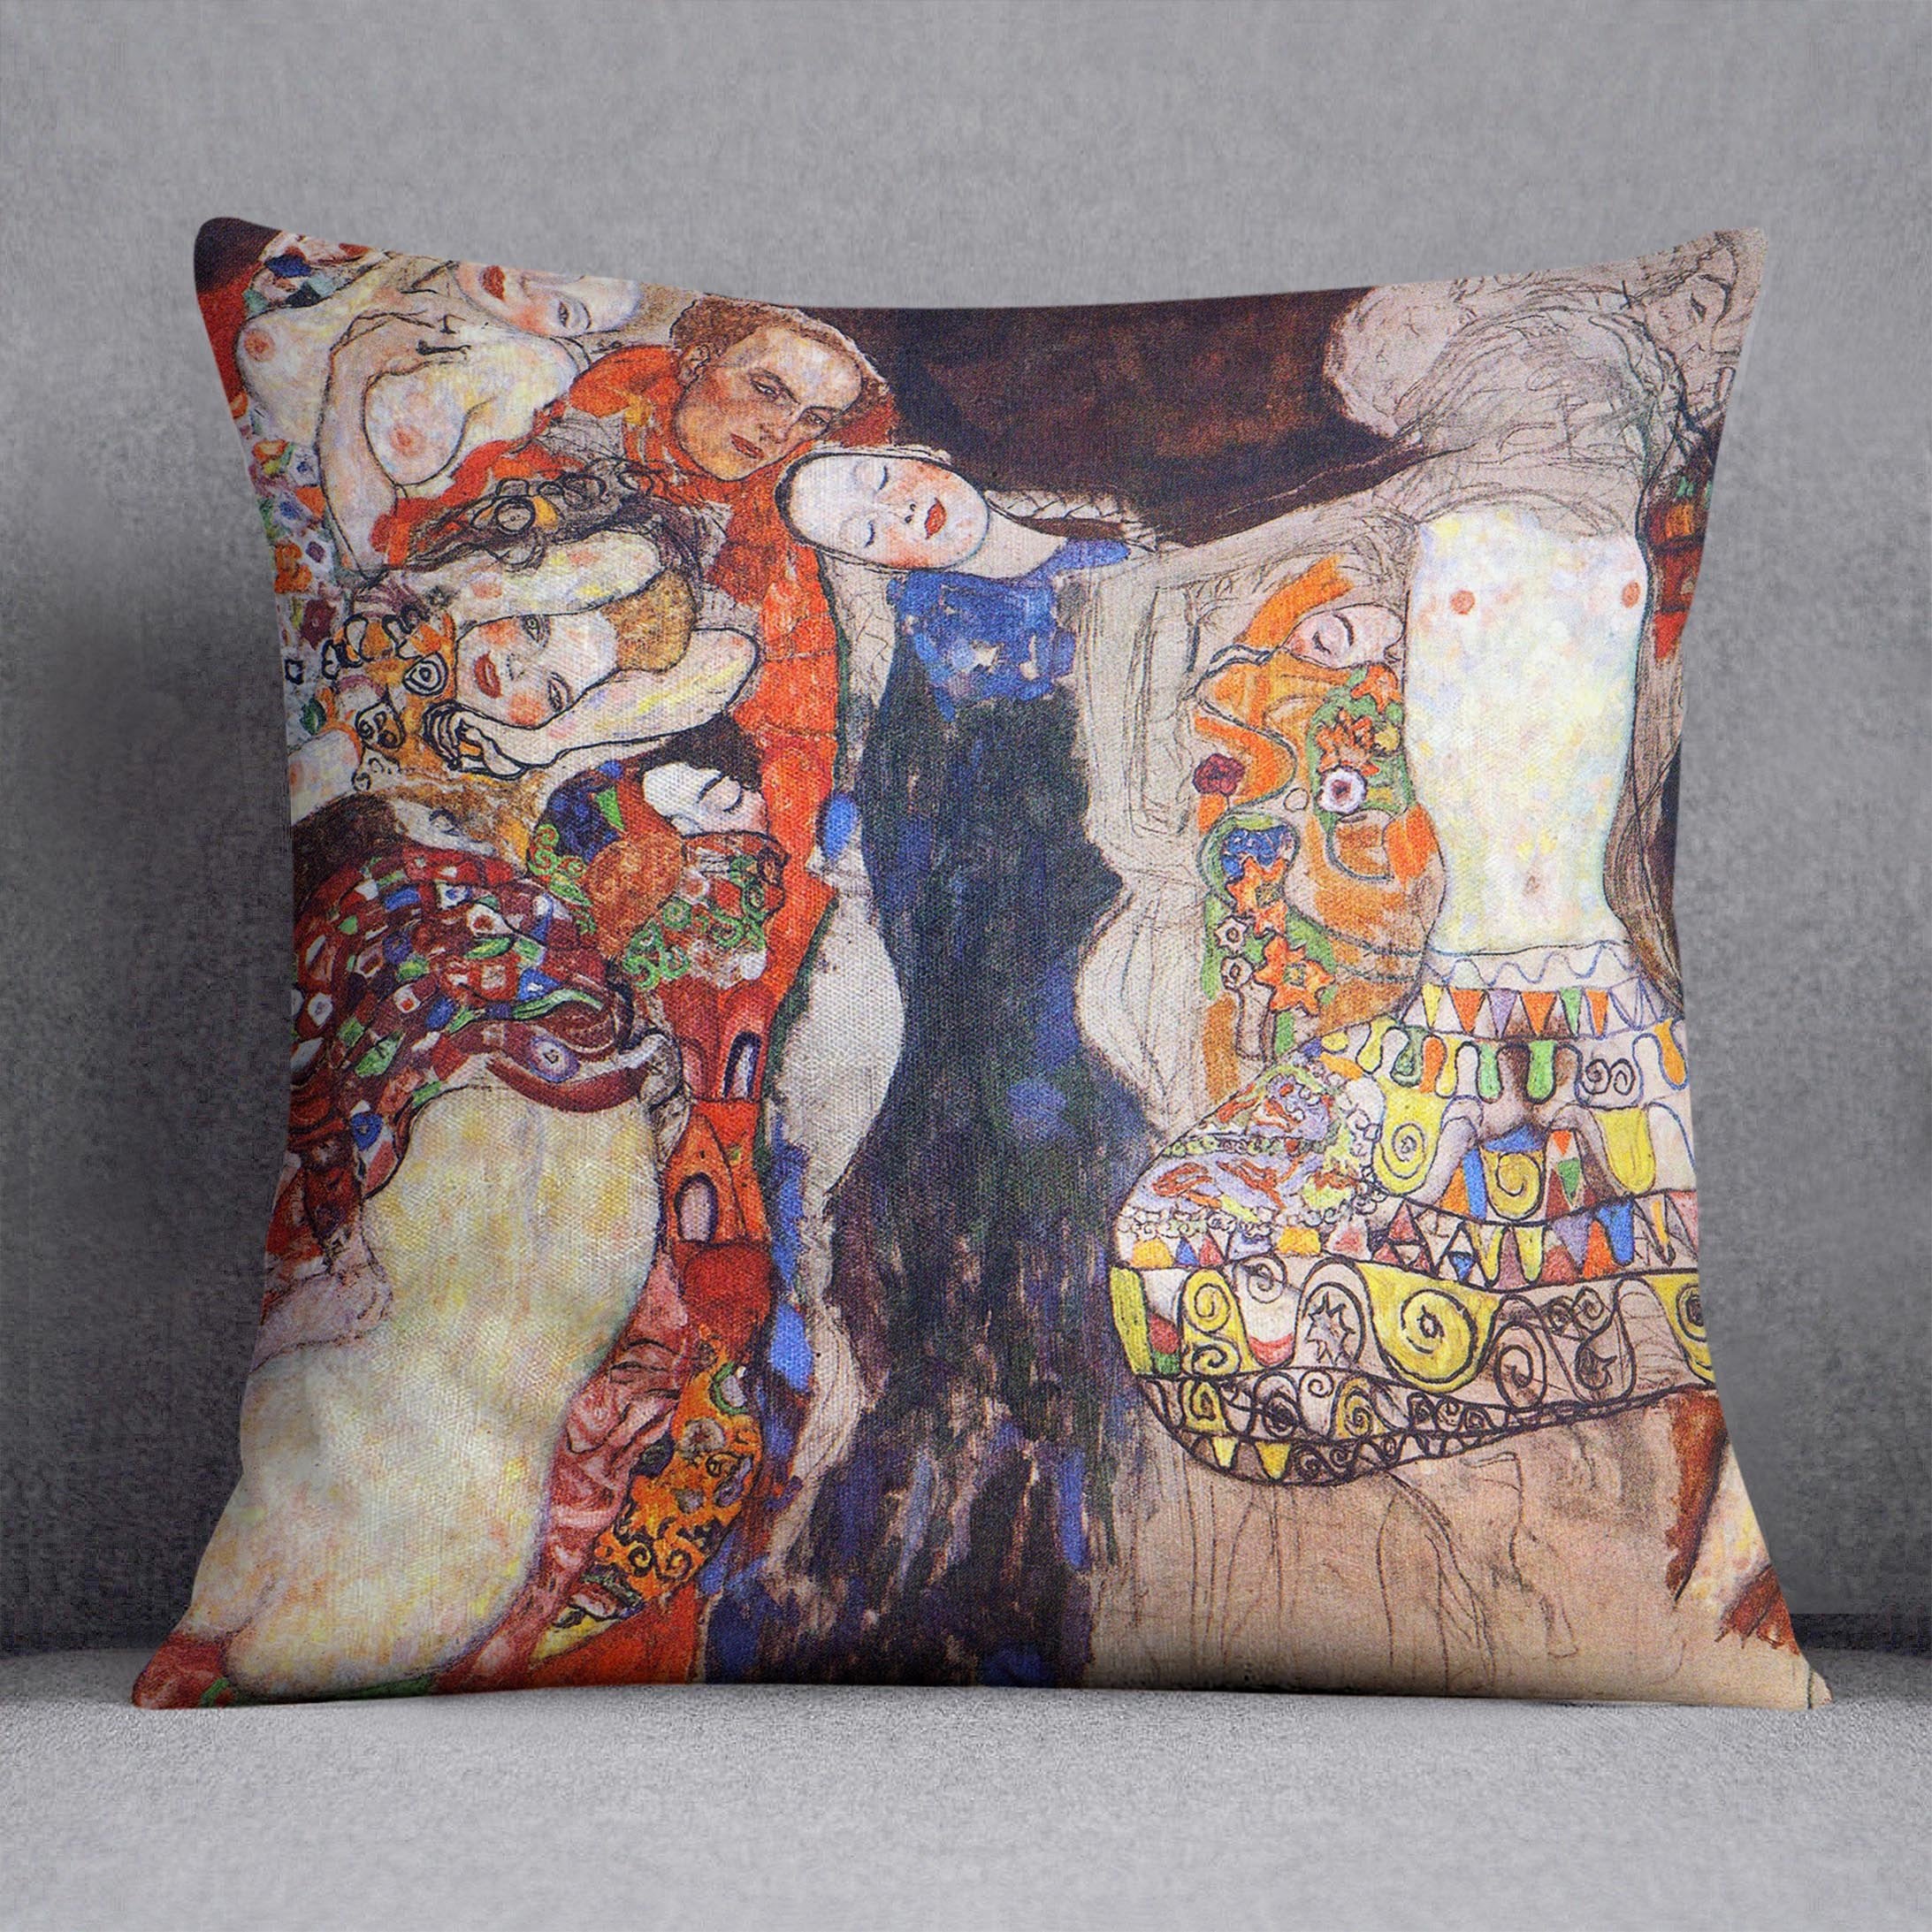 adorn the bride with veil and wreath by Klimt Throw Pillow